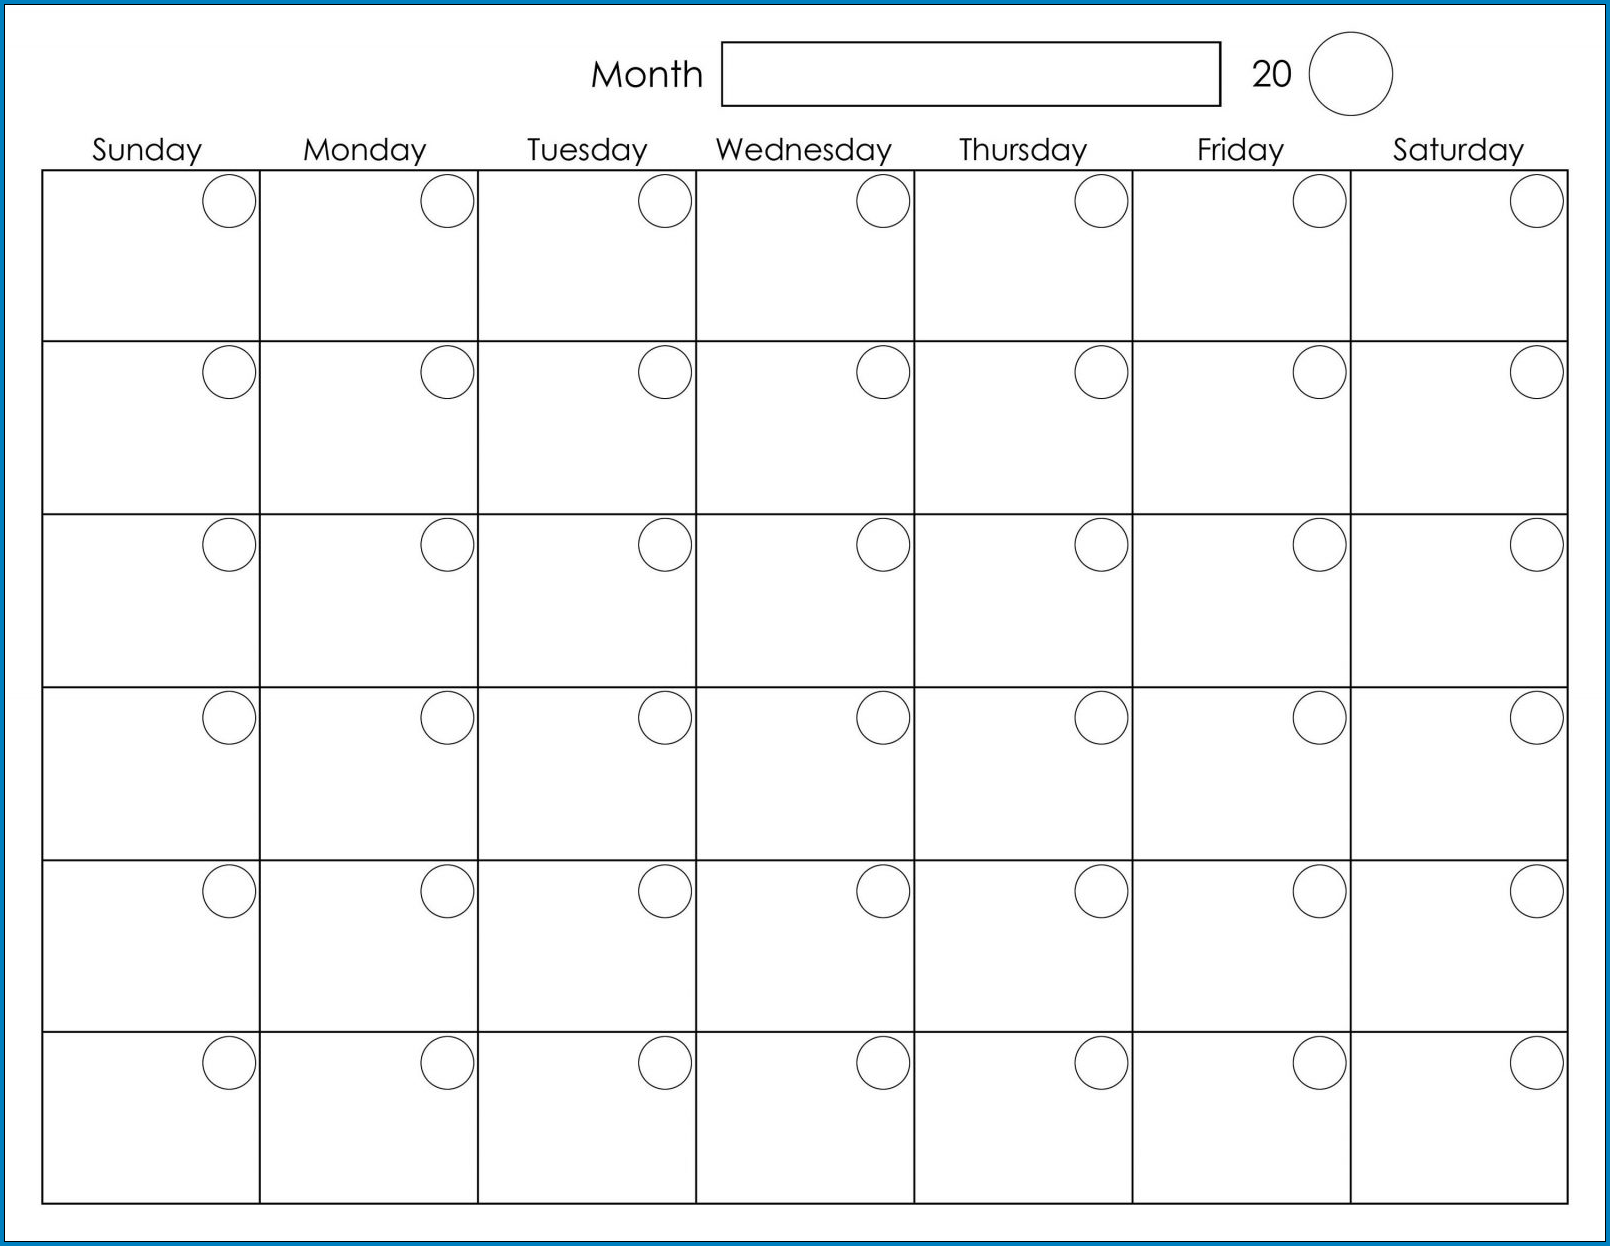 Example of Monthly Calendar Template